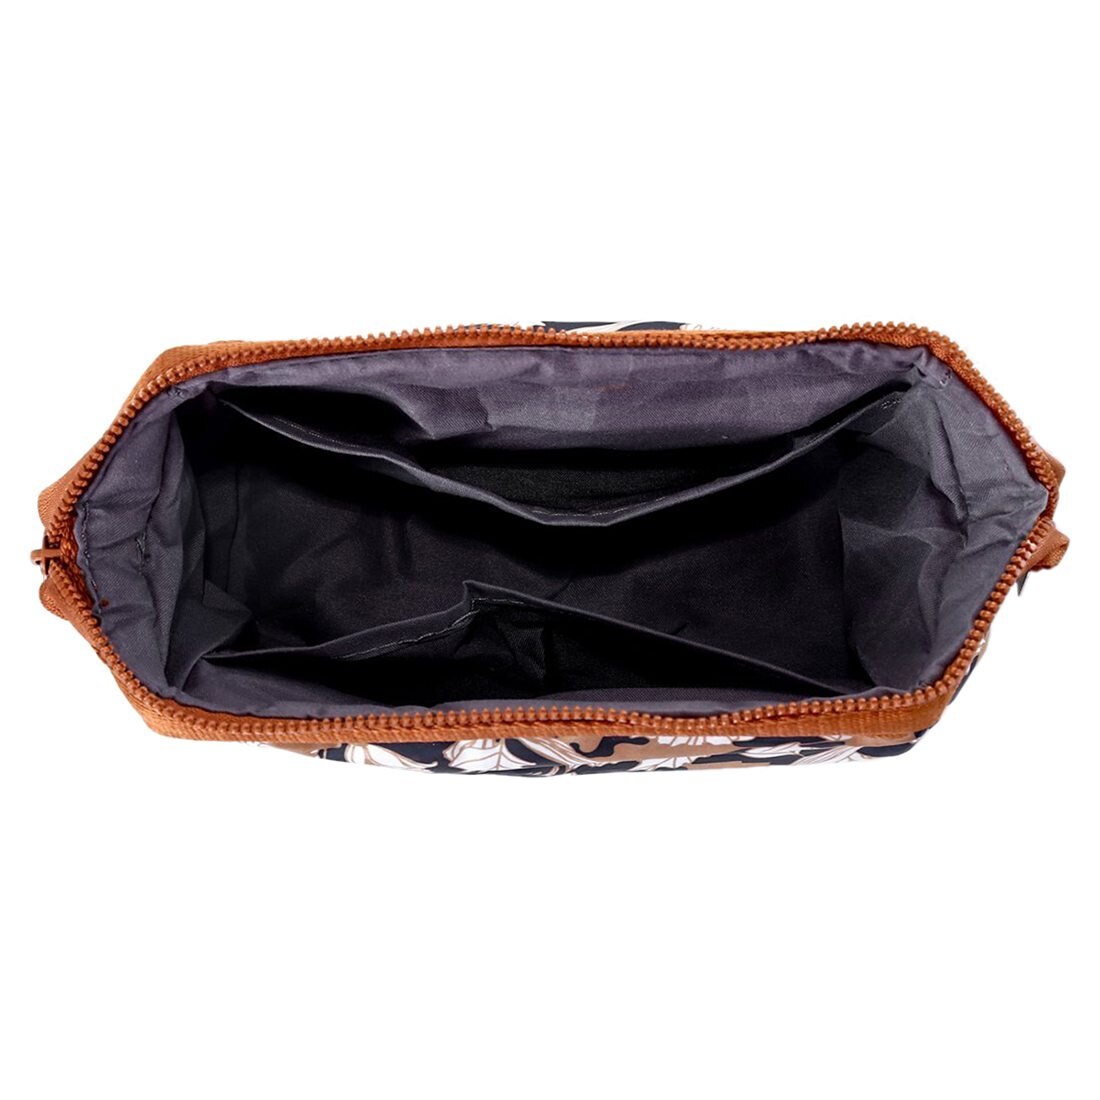 Hot-New Star Toiletry Bag Multifunction Cosmetic Bag Portable Makeup Pouch Waterproof Travel Brush Pouch Organizer Bag for Wom - ebowsos